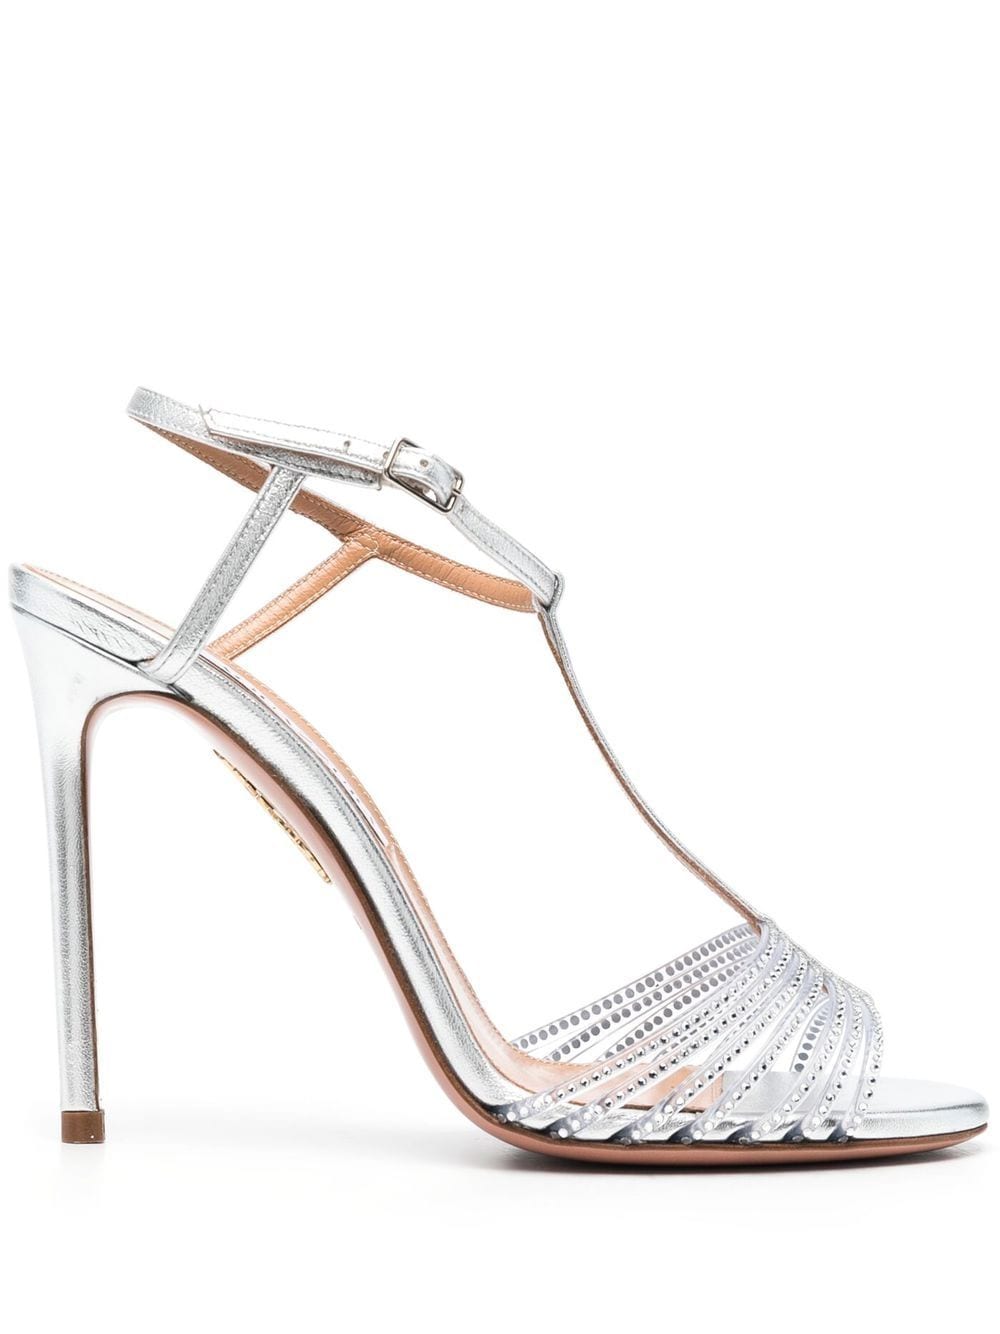 Aquazzura Amore Mio Crystal 105mm Leather Sandals In Silver